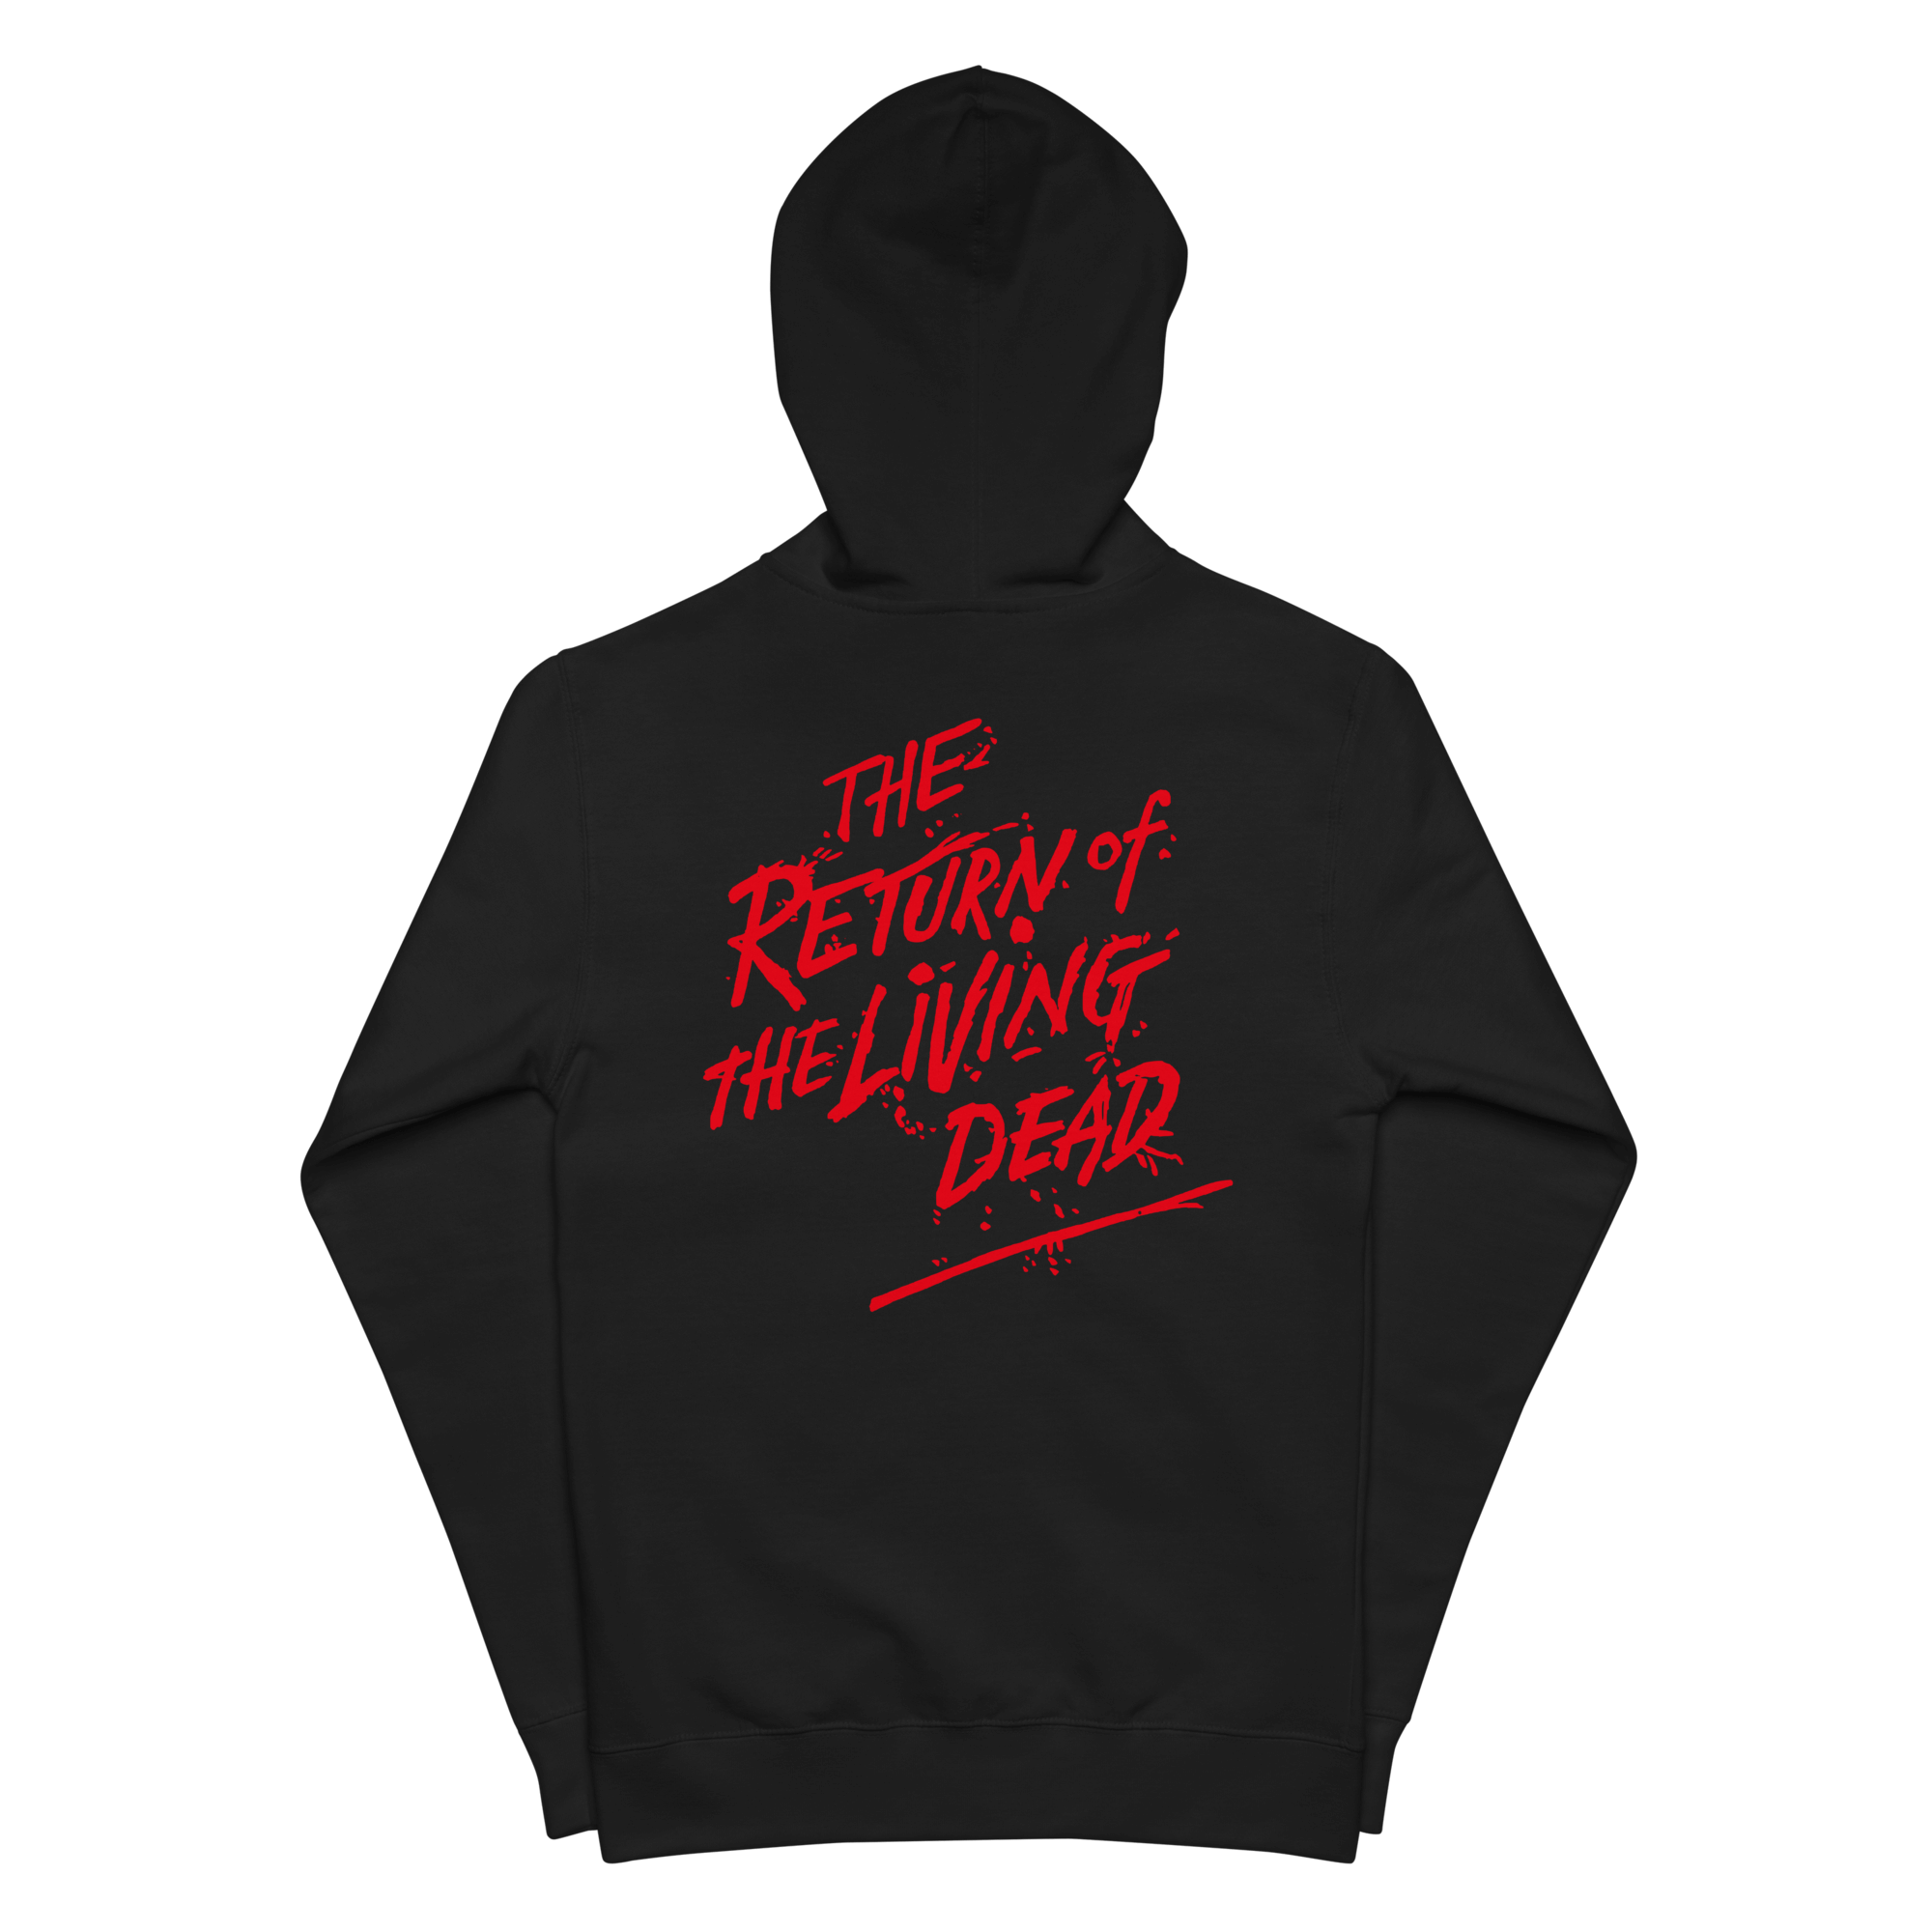 The Return Of The Living Dead Embroidery Zip Up HoodieDive into undead comfort with The Return Of The Living Dead Embroidery Zip Up Hoodie. Crafted from soft, premium-quality fleece and featuring a jersey-lined hood, this unisex zip-up is your go-to cozy